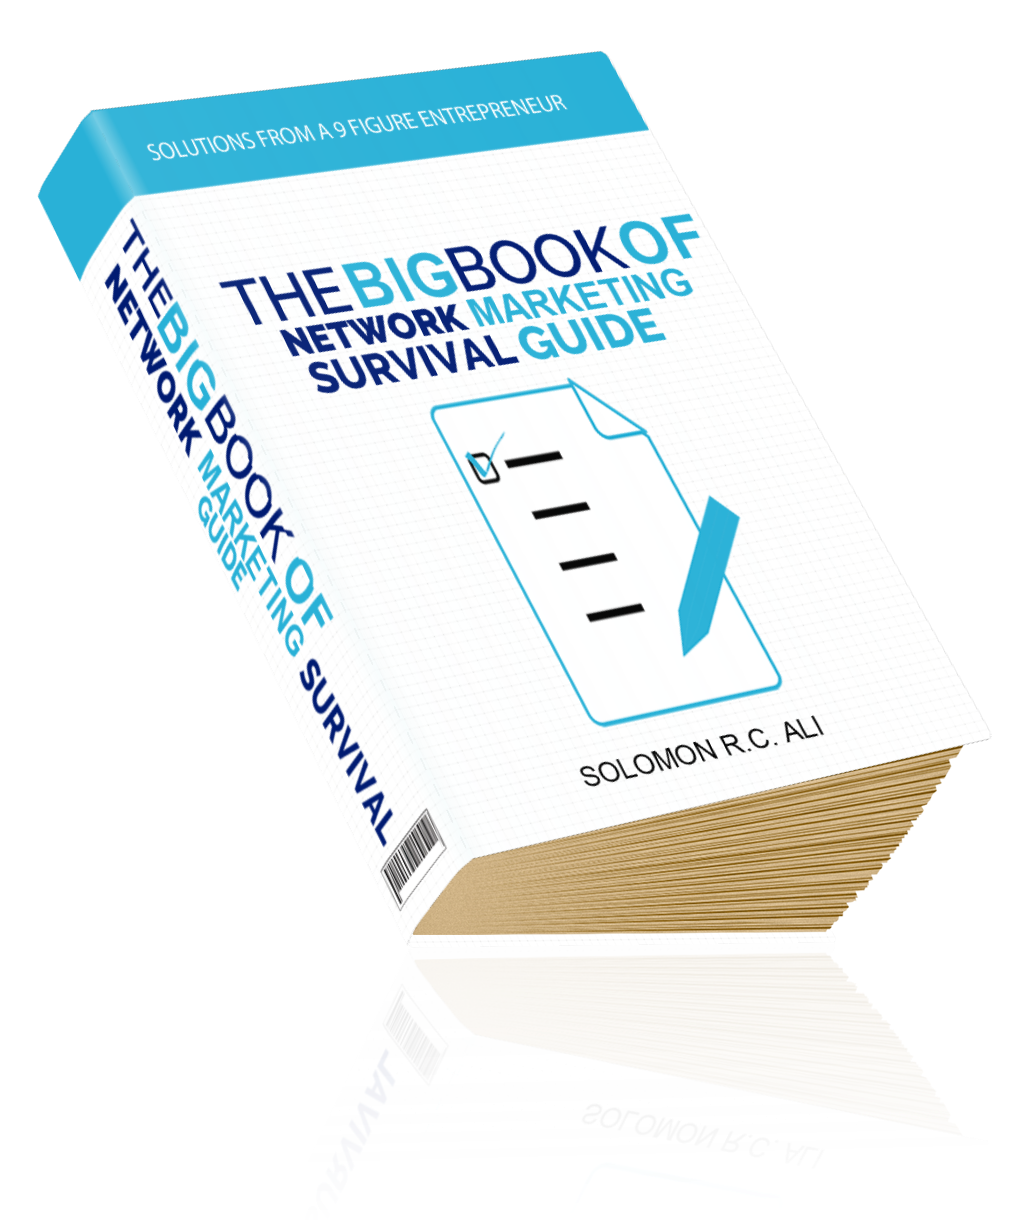 The Big Book of Network Marketing Survival Guide